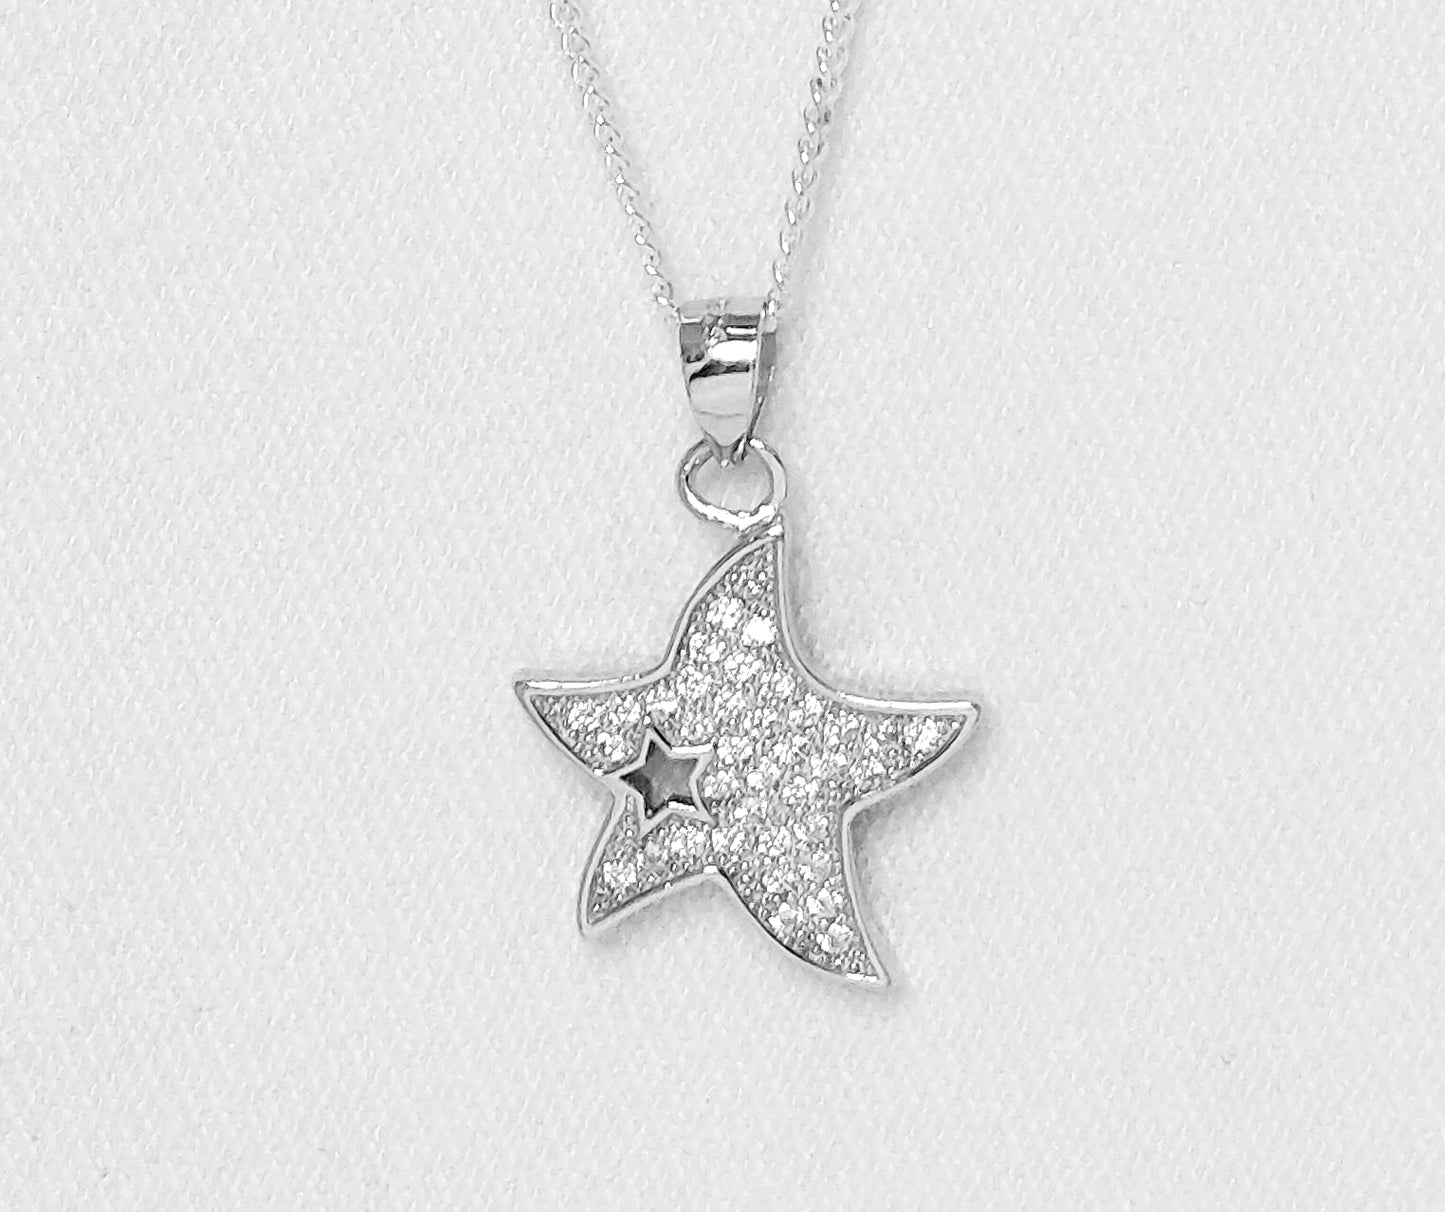 sterling silver star pendant with cubic zirconia stones.